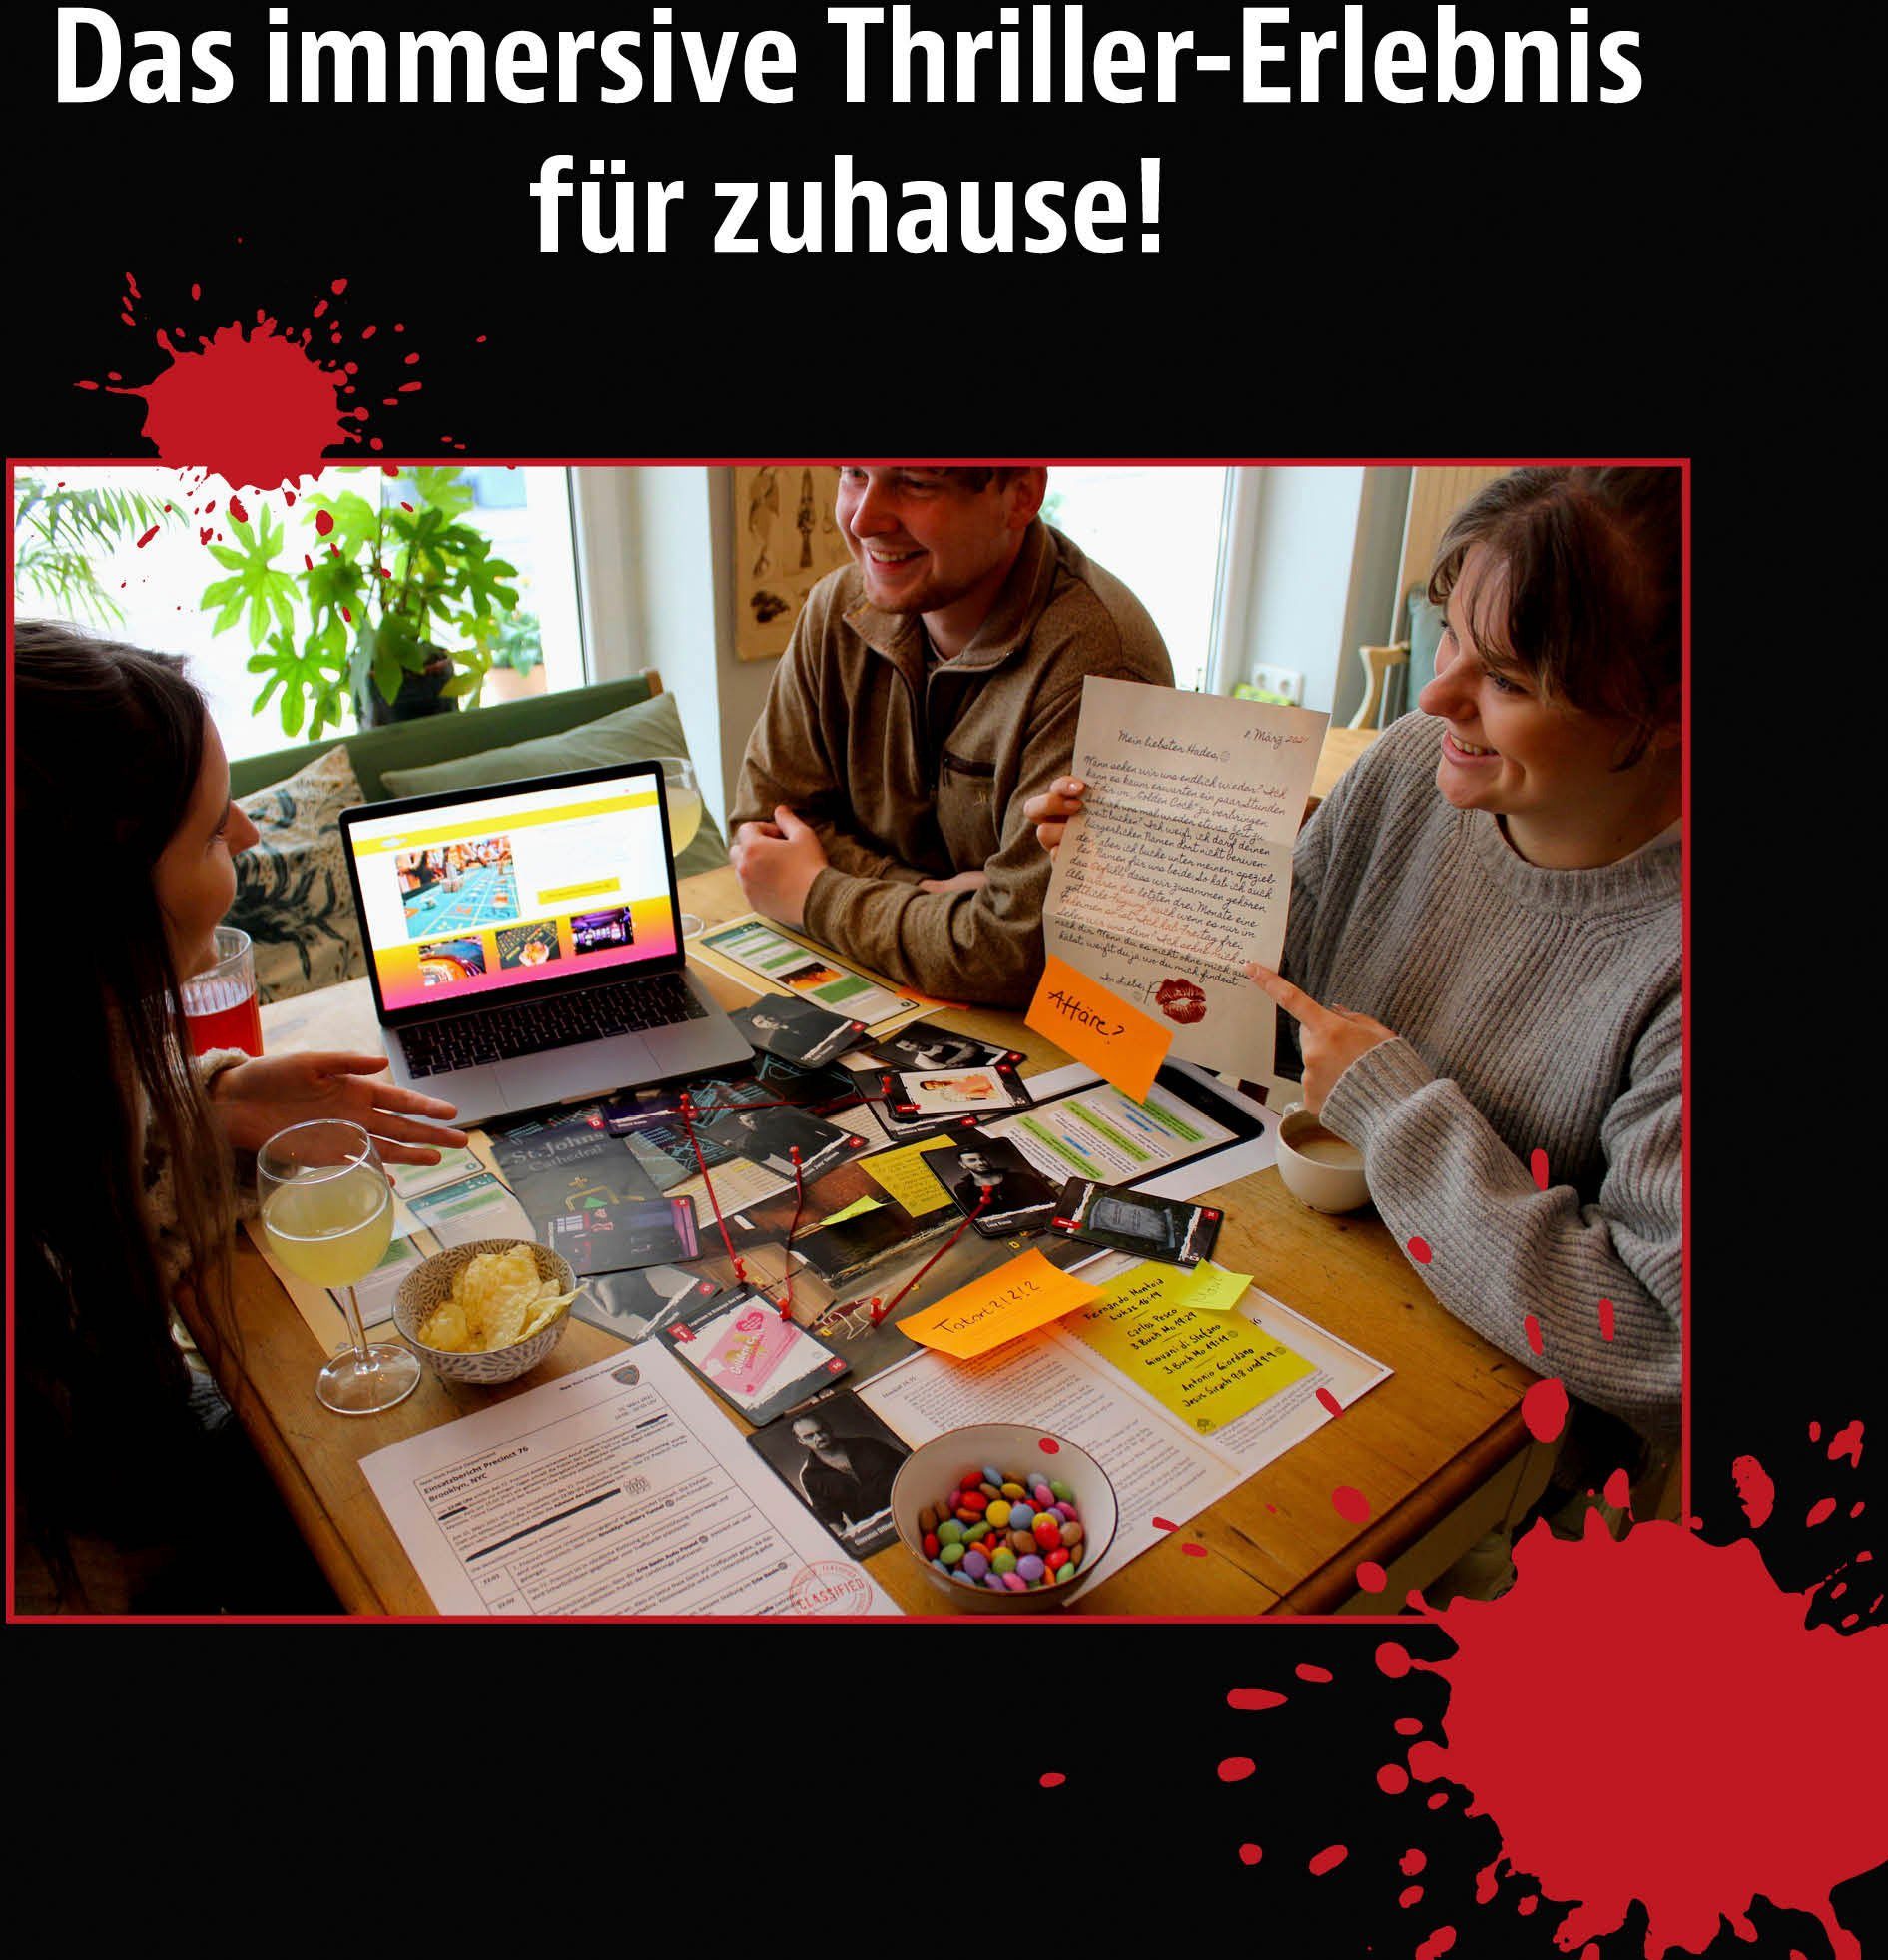 Kosmos Spiel, Masters Germany of in Vendetta, Made - Crime